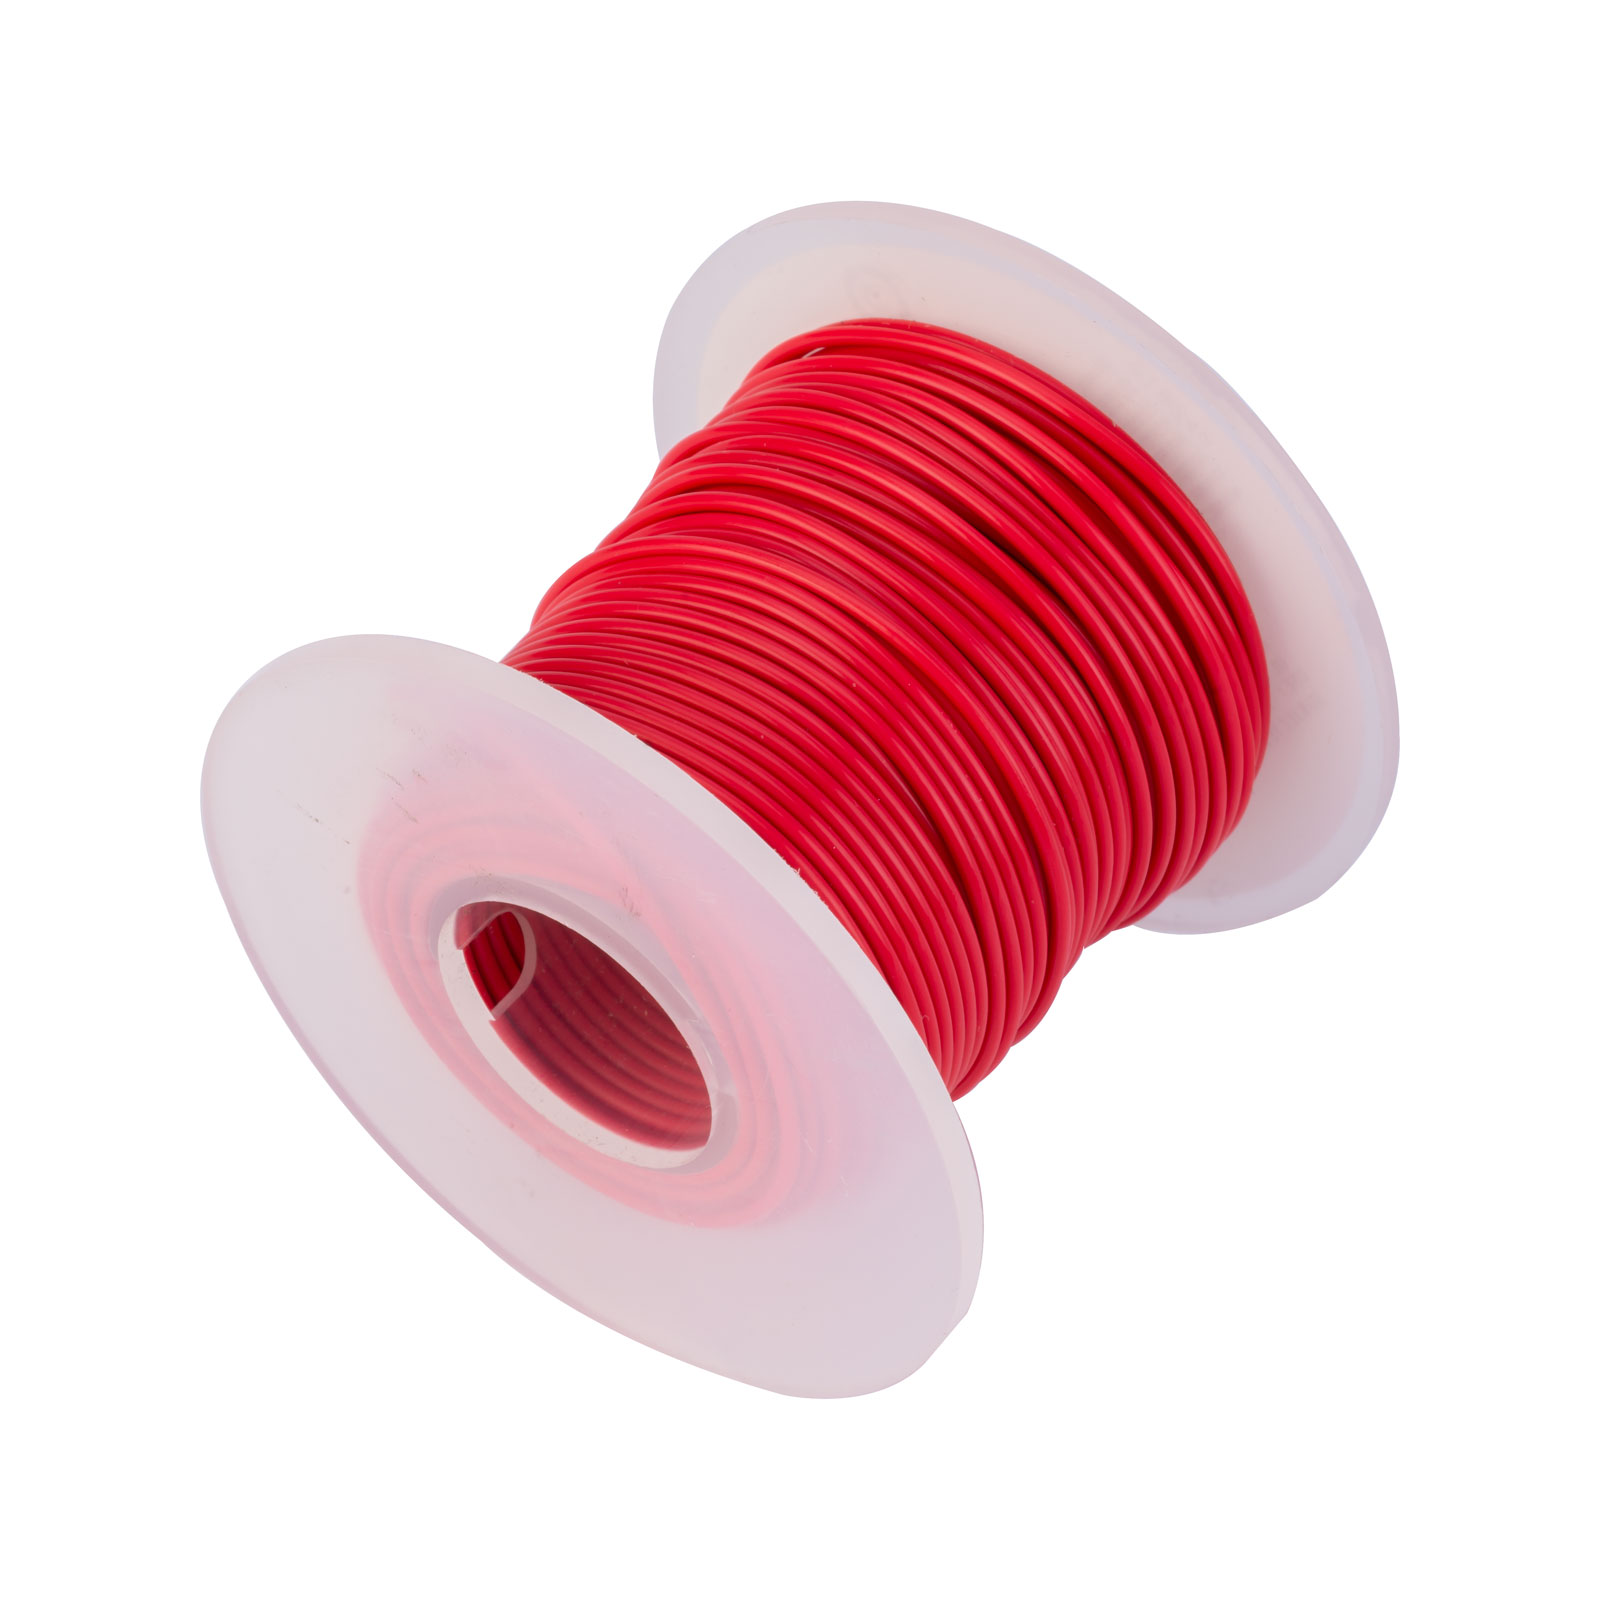 Alpha Wire 5856 RD005 Red 20AWG 19/32 TYPE E Hu Wire Teflon (100